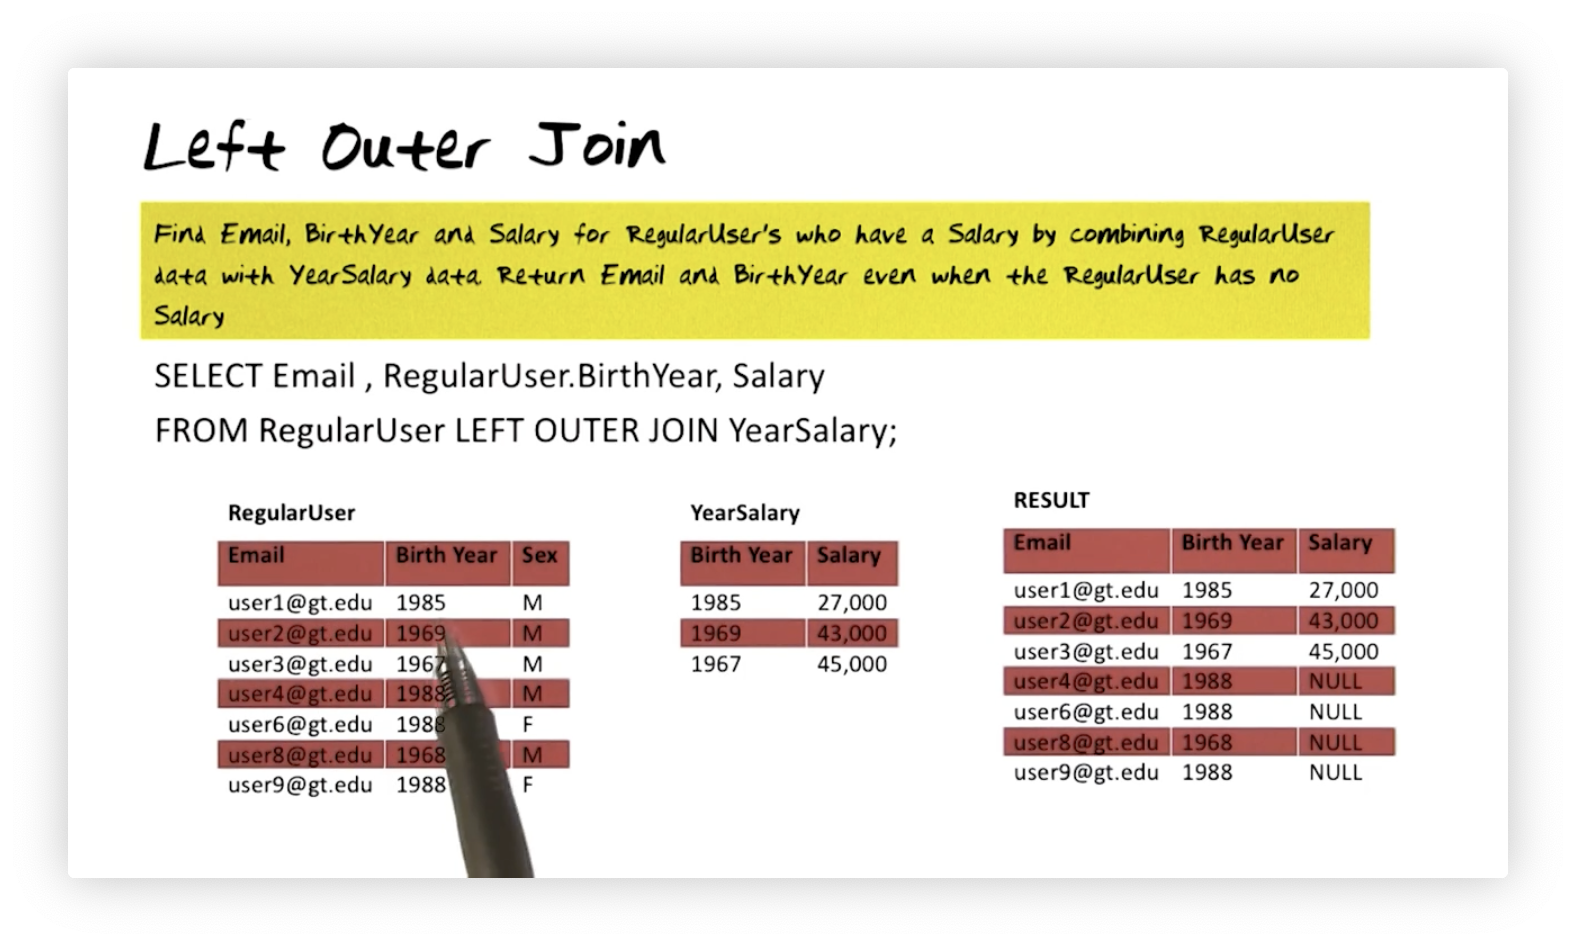 Using left outer joins to return all regular user information, even for those
users who don't have associated salary
data.